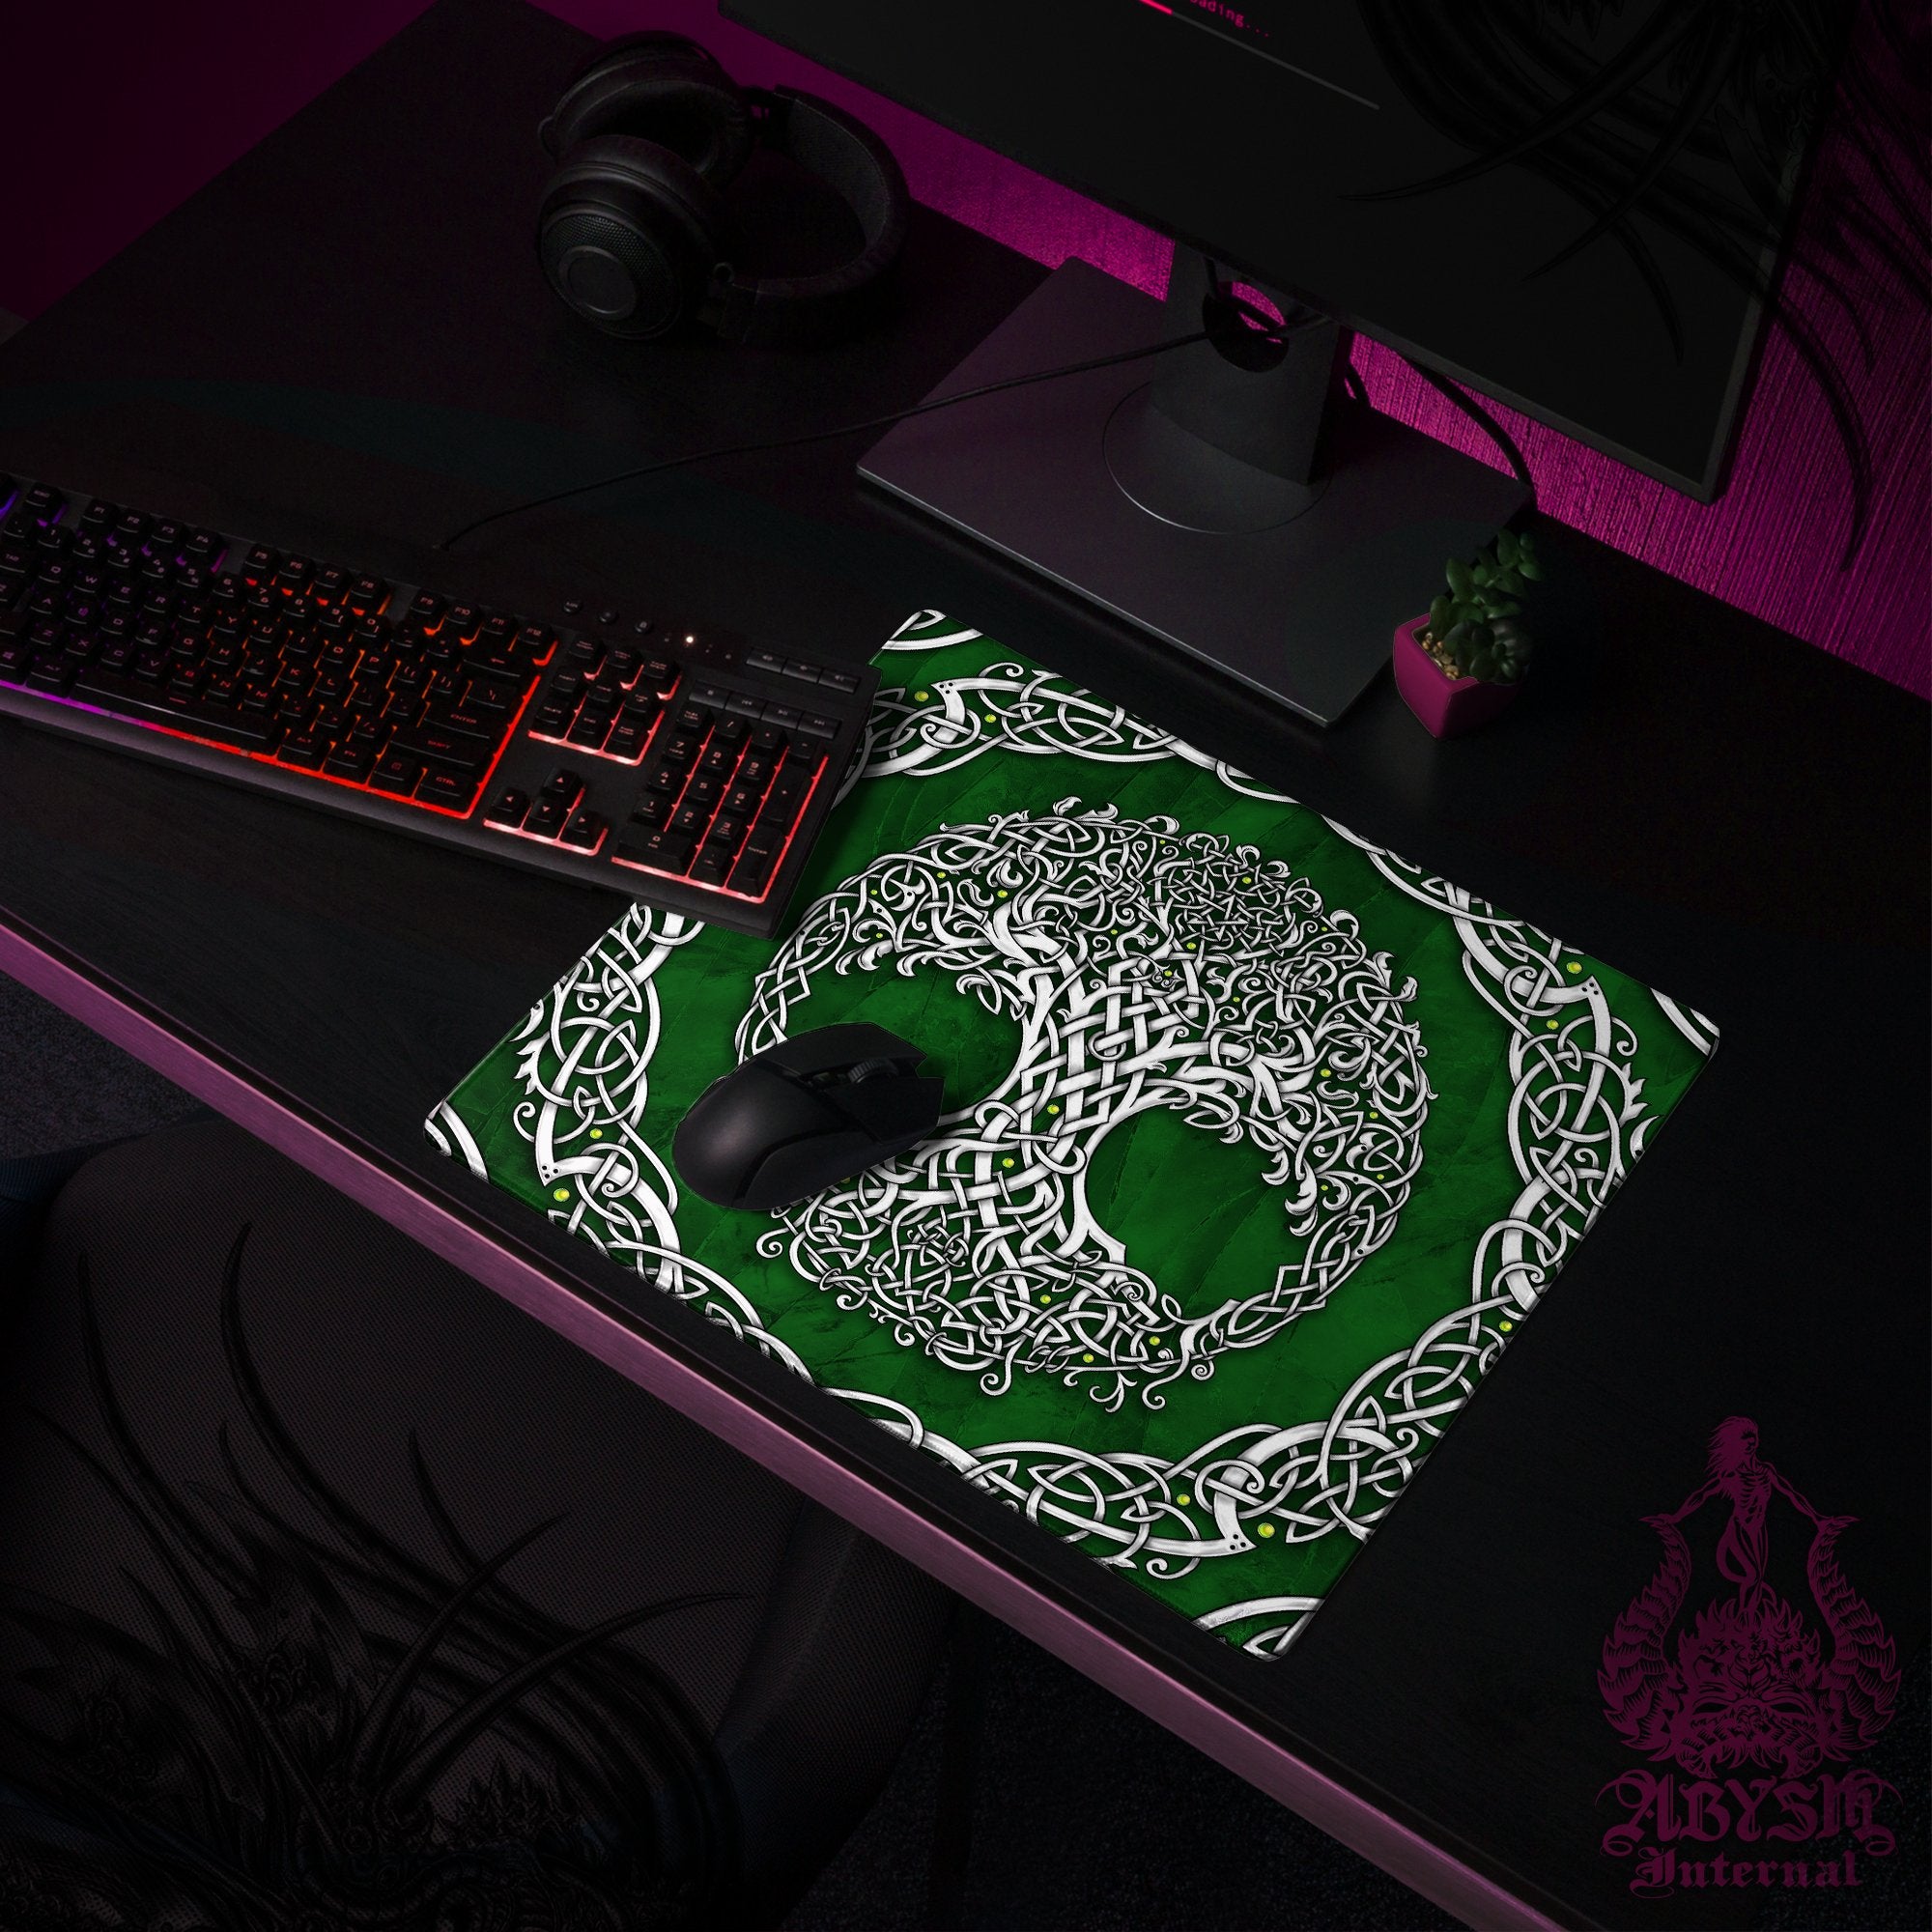 Tree of Life Gaming Mouse Pad, Celtic Knotwork Desk Mat, Wicca Table Protector Cover, Boho Workpad, Art Print - White, 3 Colors - Abysm Internal